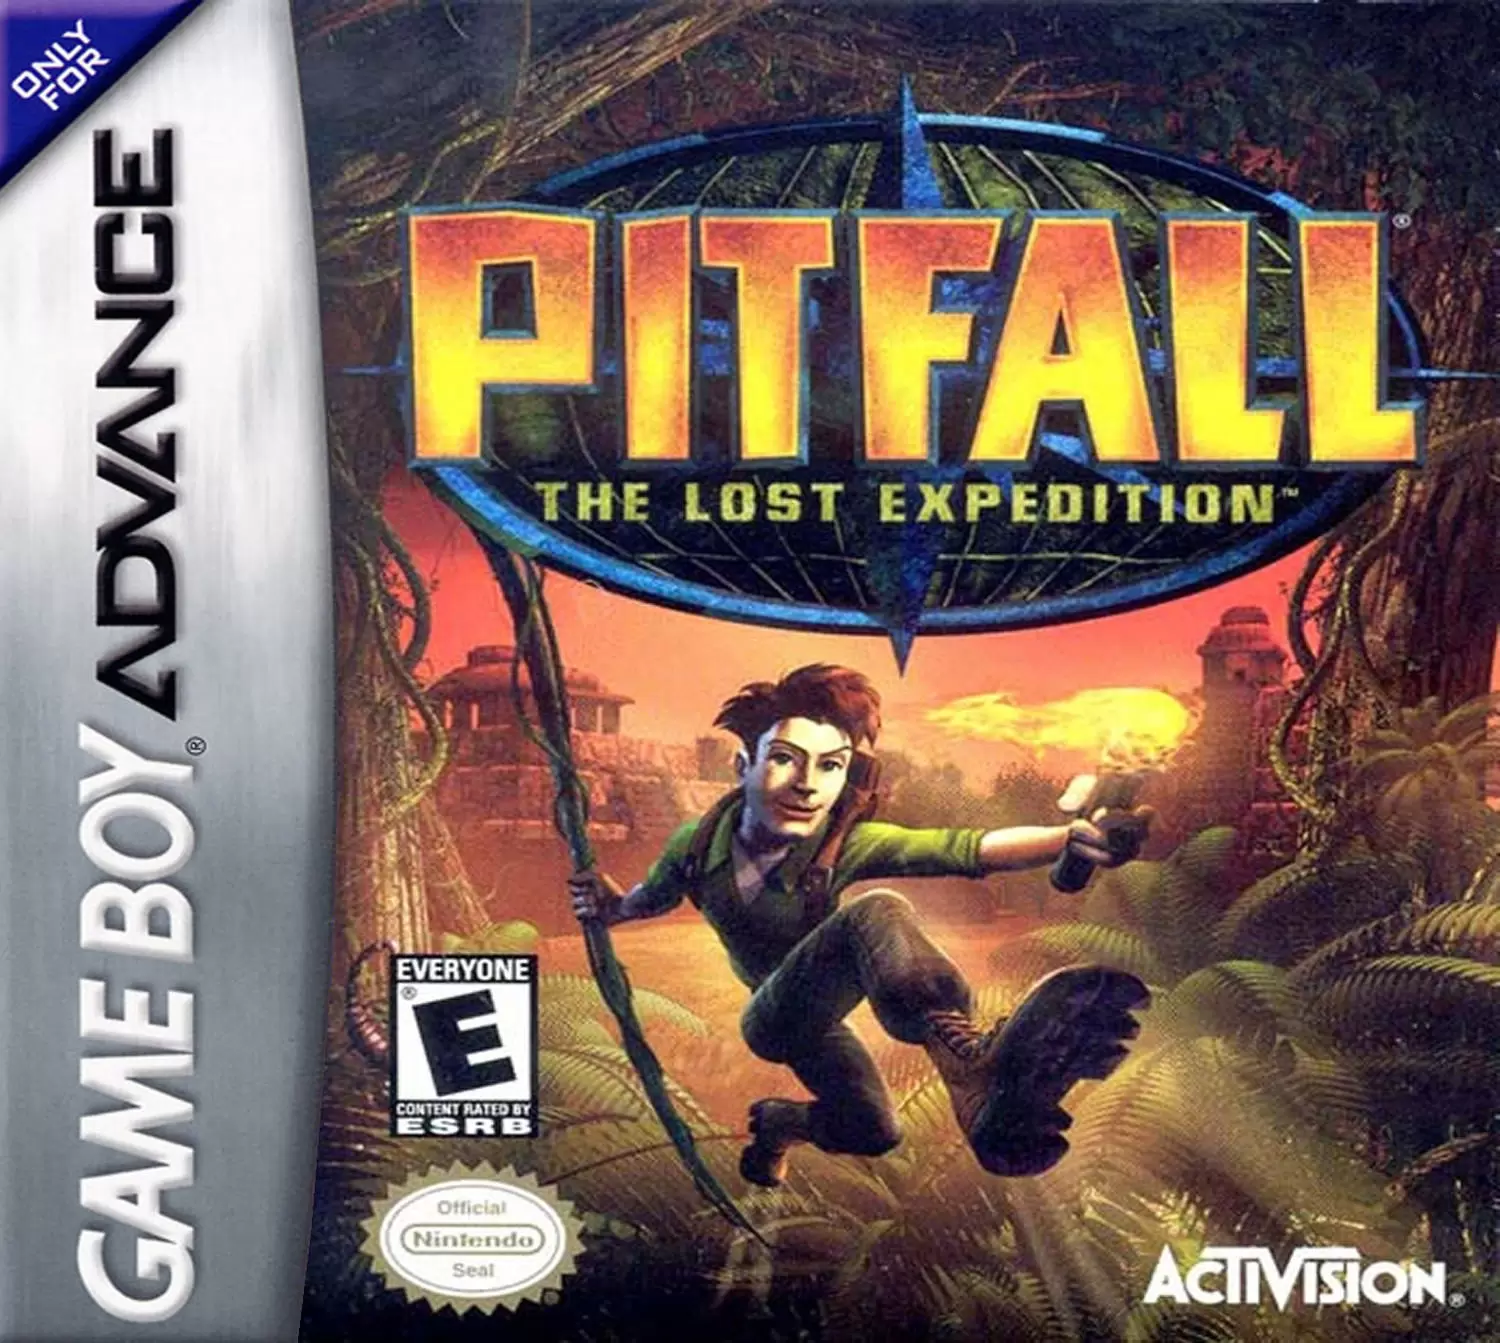 Game Boy Advance Games - Pitfall: The Lost Expedition